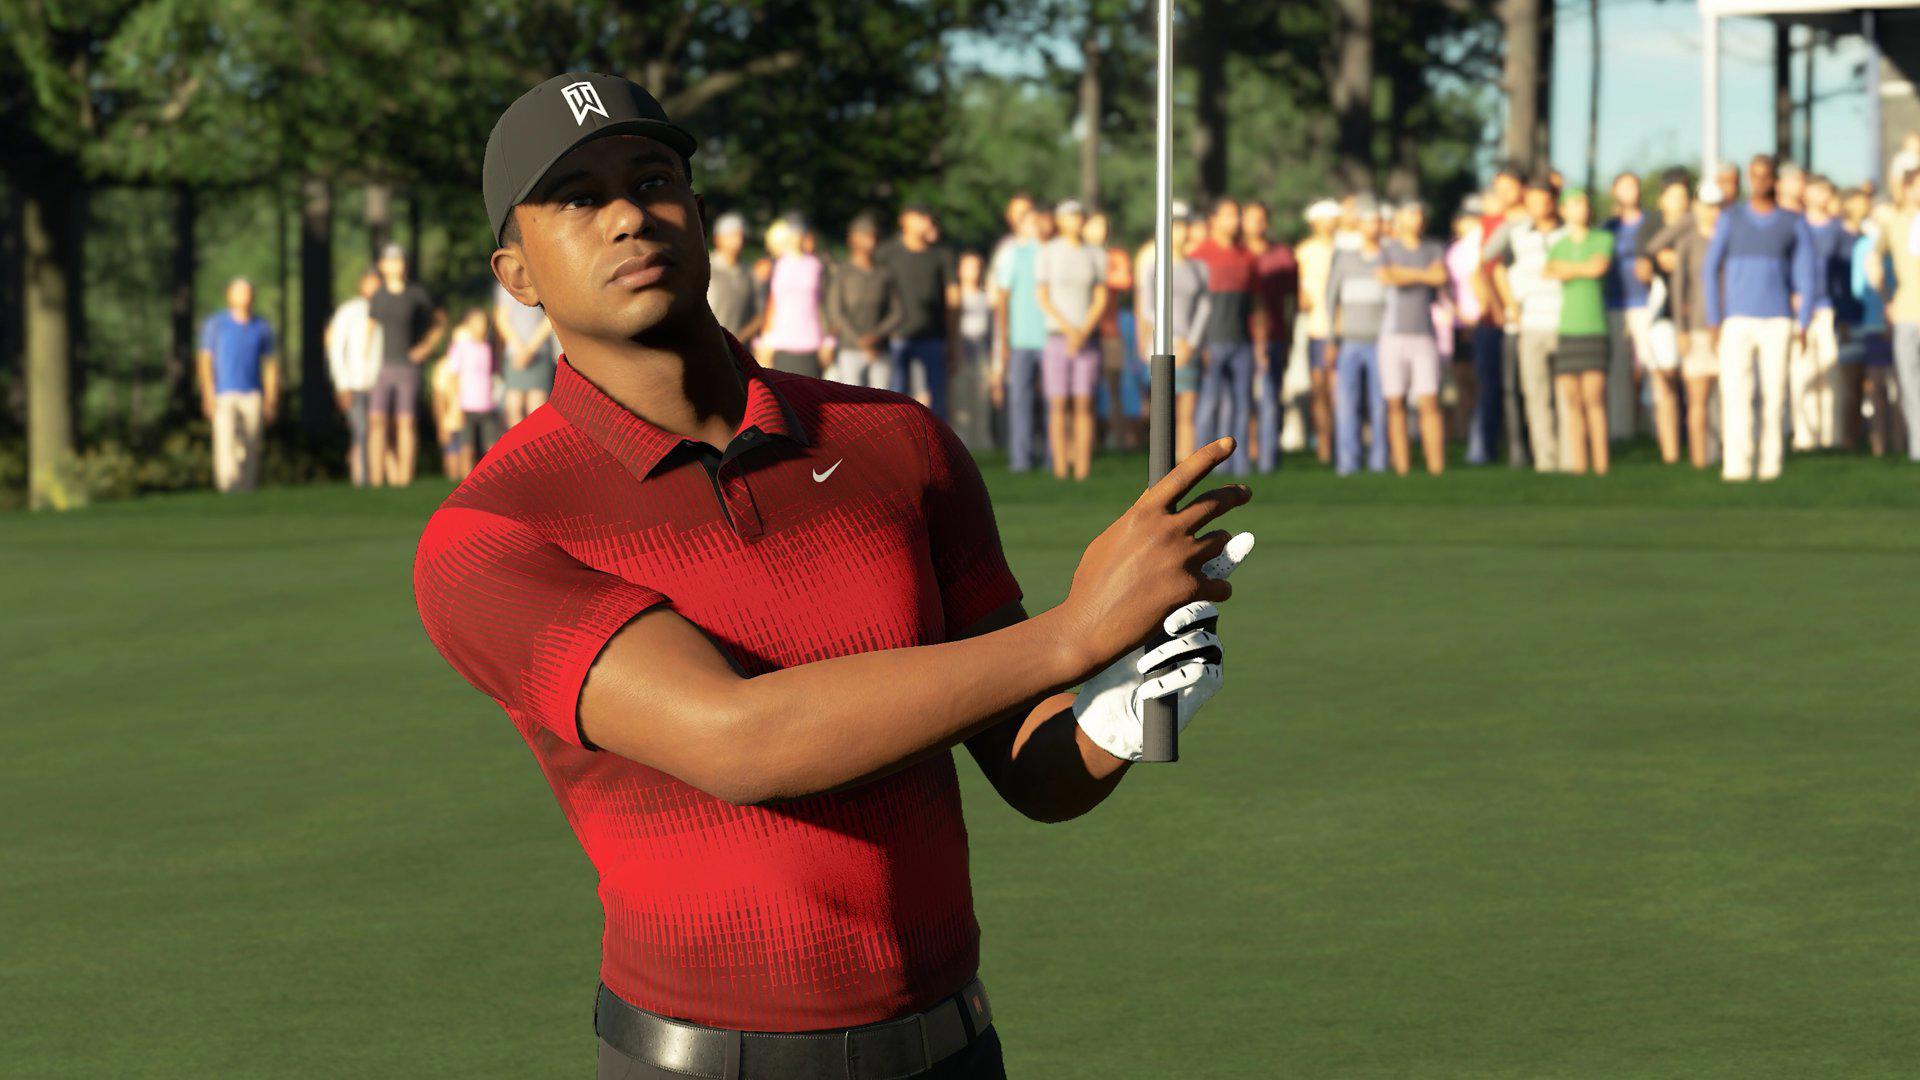 is pga tour 2k23 on ps4